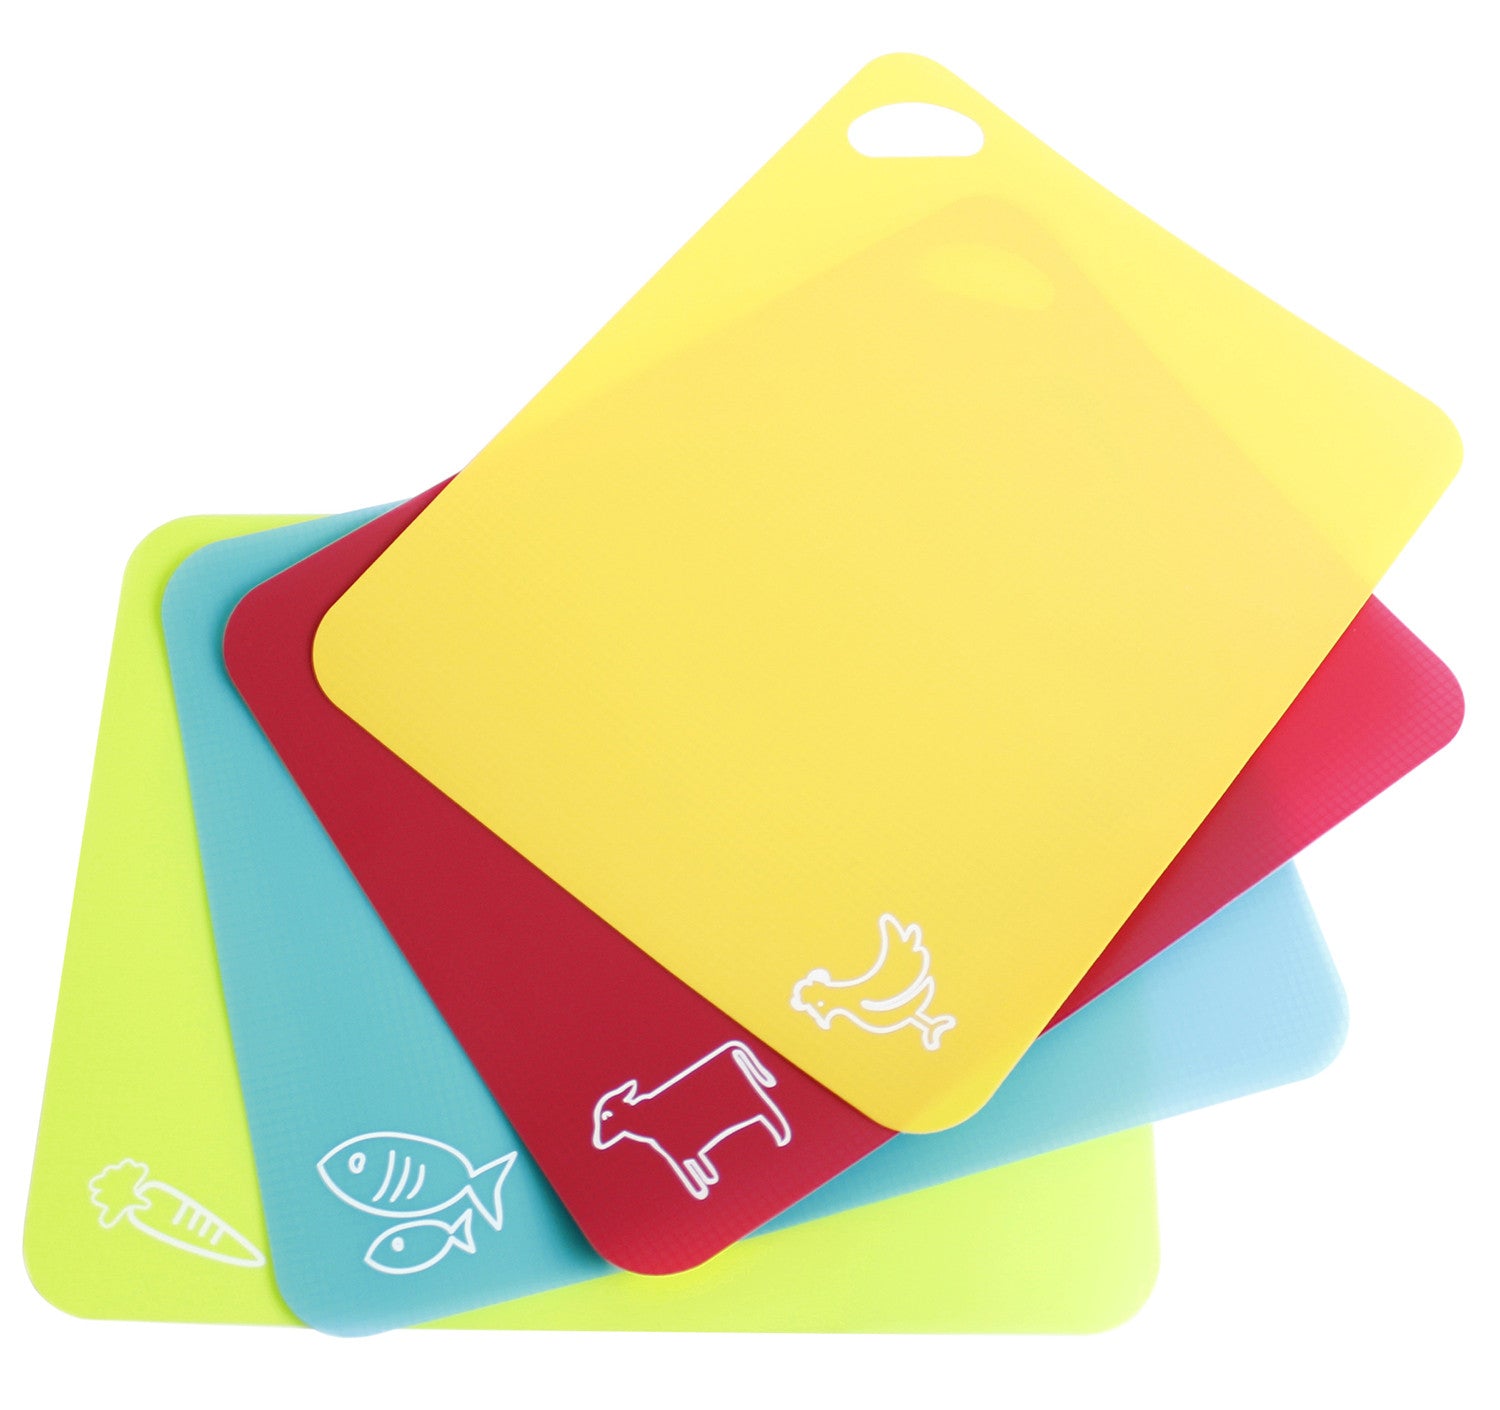 Neoflam Flexible Cutting Mats with Non-Slip Grip Set of 4, Multicolor